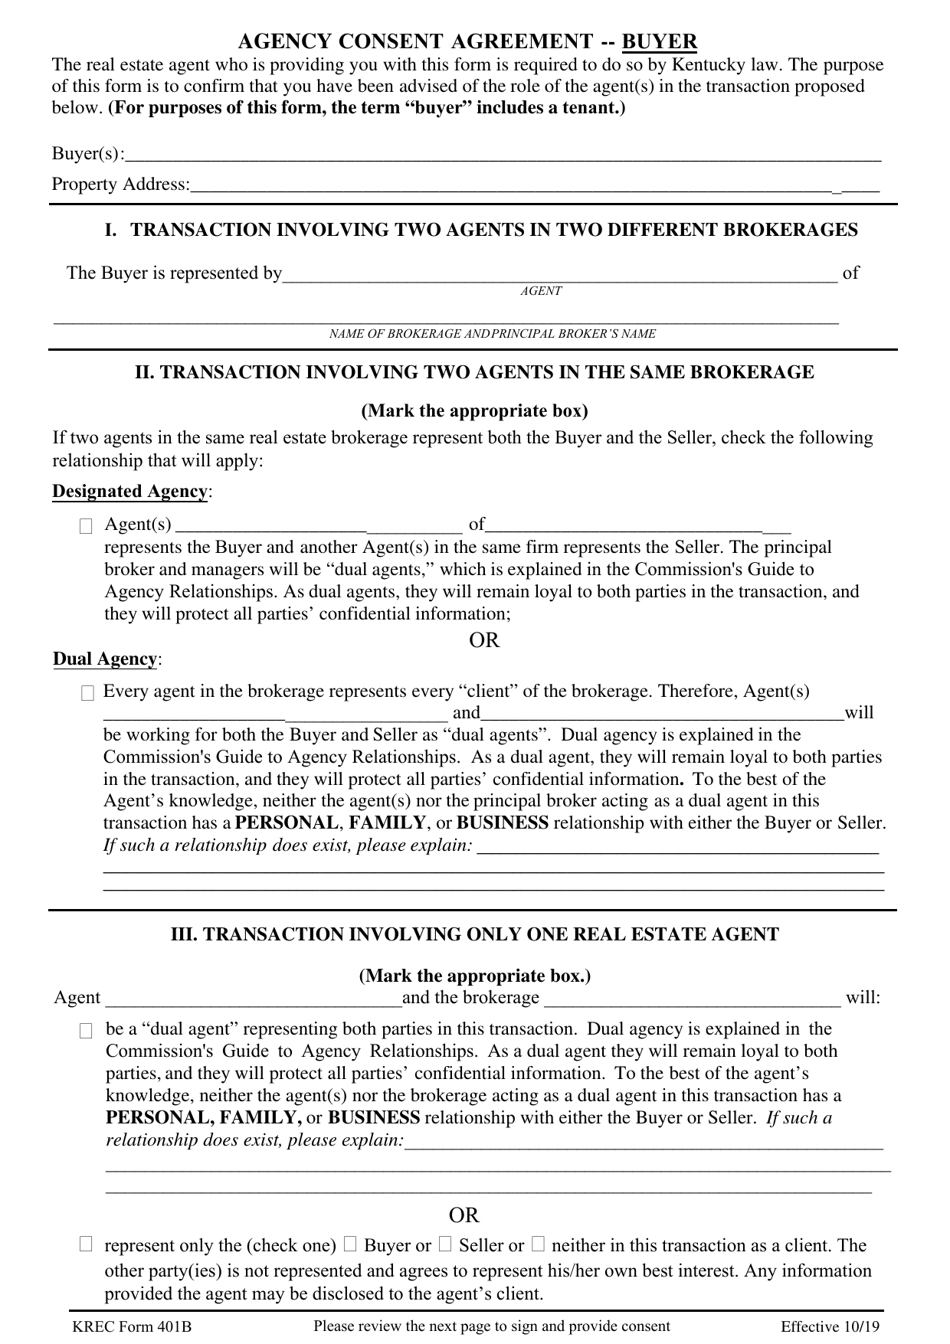 KREC Form 401B Agency Consent Agreement - Buyer - Kentucky, Page 1